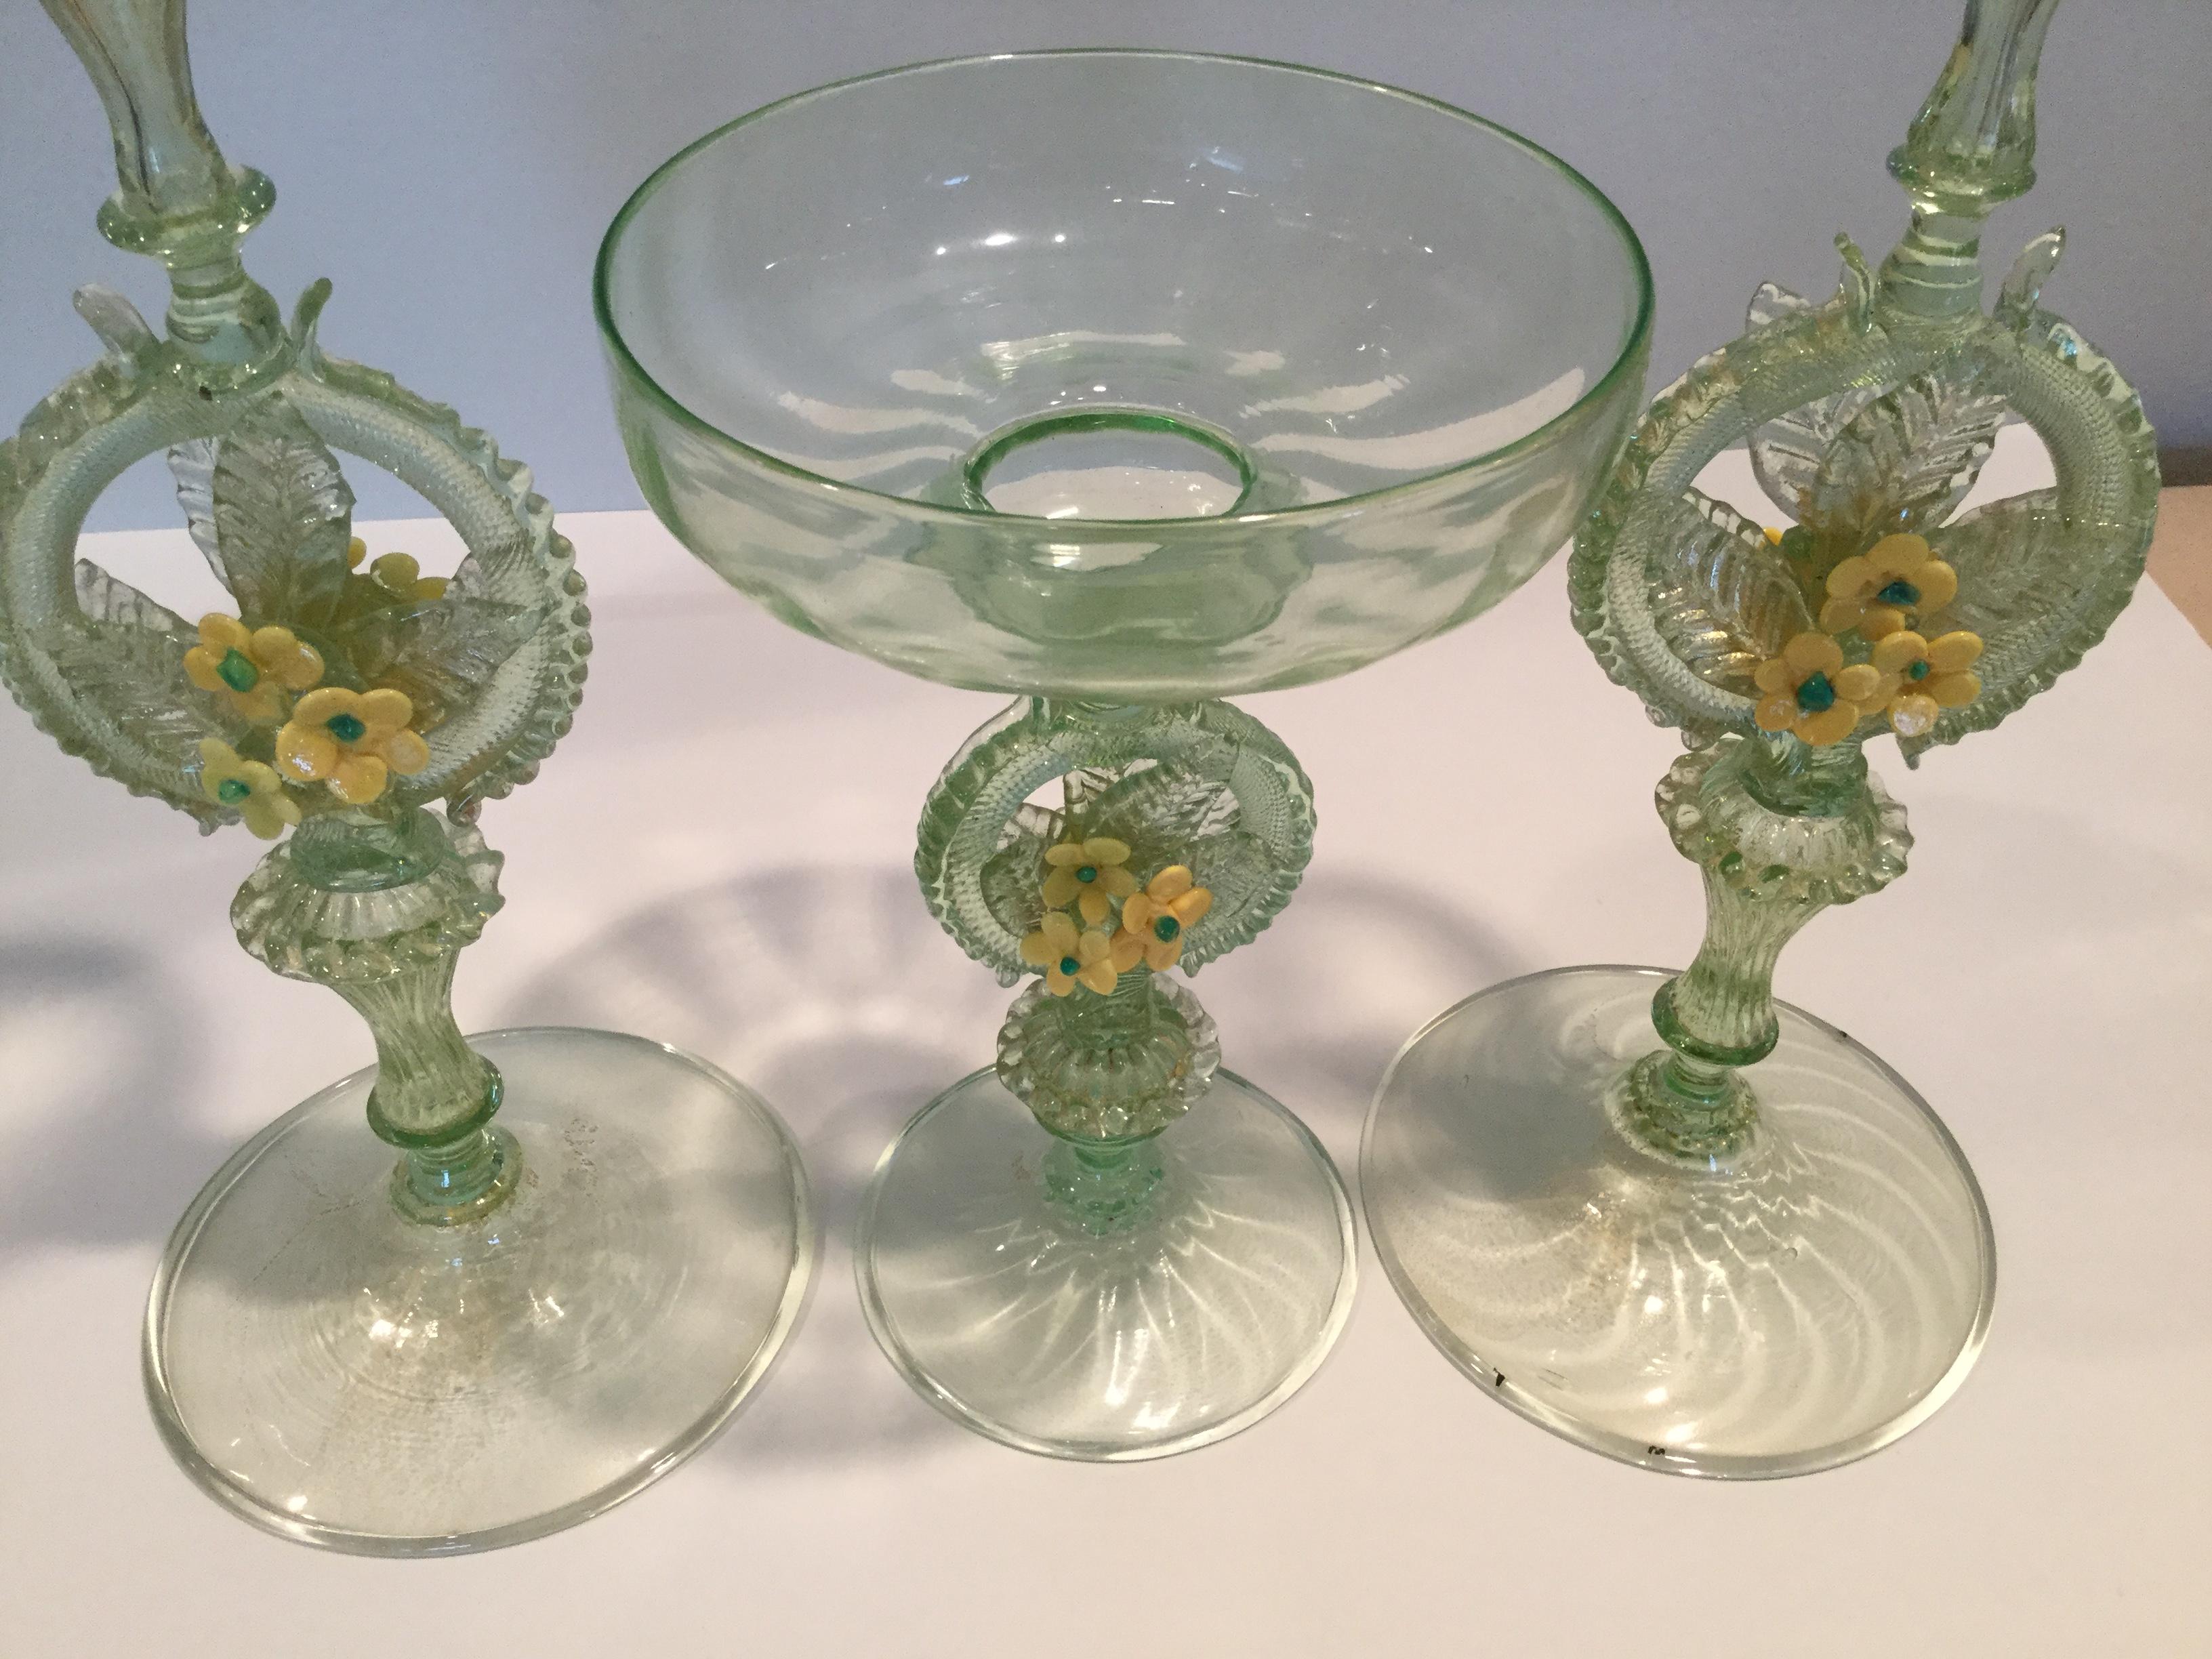 Very early Venetian glass console set circa 1880-1910. Large decorative candle holders with matching bowl.